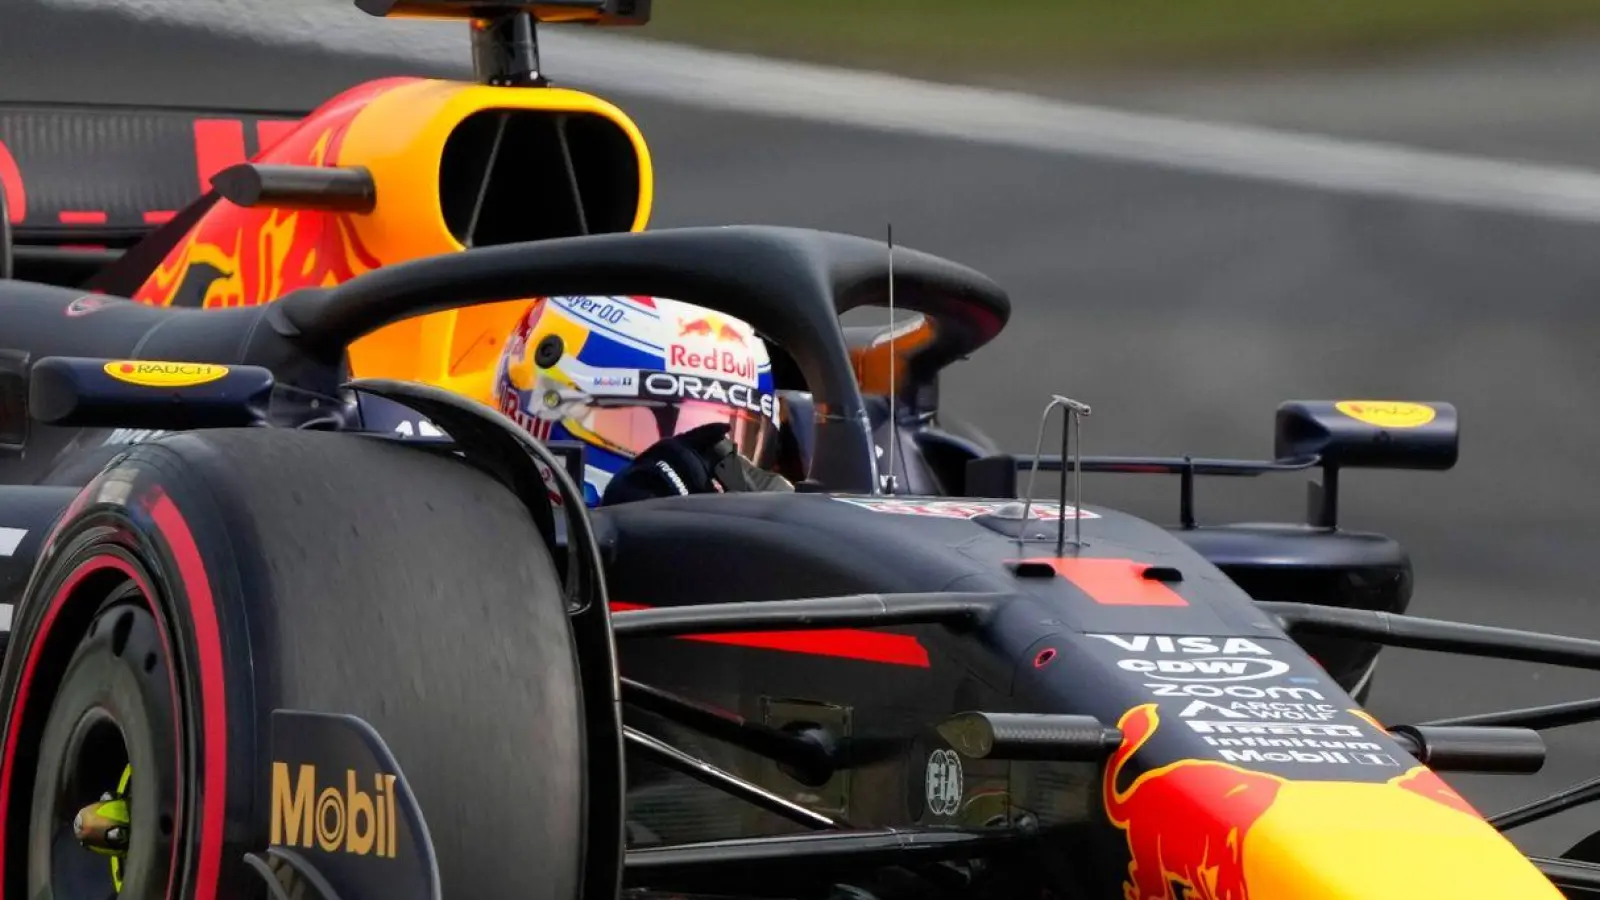 Schnappte sich in China die Pole Position: Max Verstappen. (Foto: Andy Wong/AP)